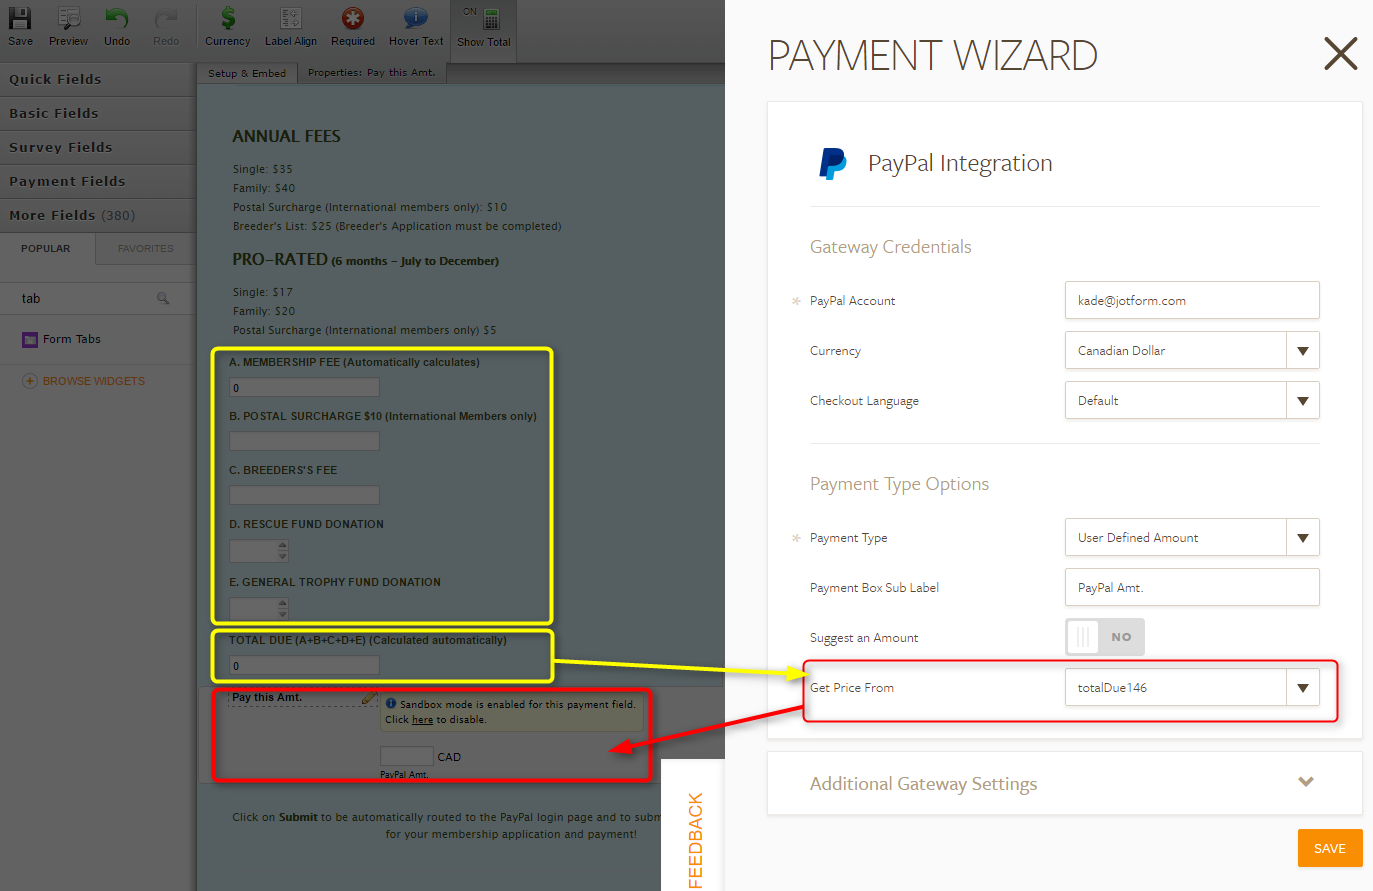 Form Submit always takes form to PayPal even if Paypal payment isnt selected Image 2 Screenshot 41